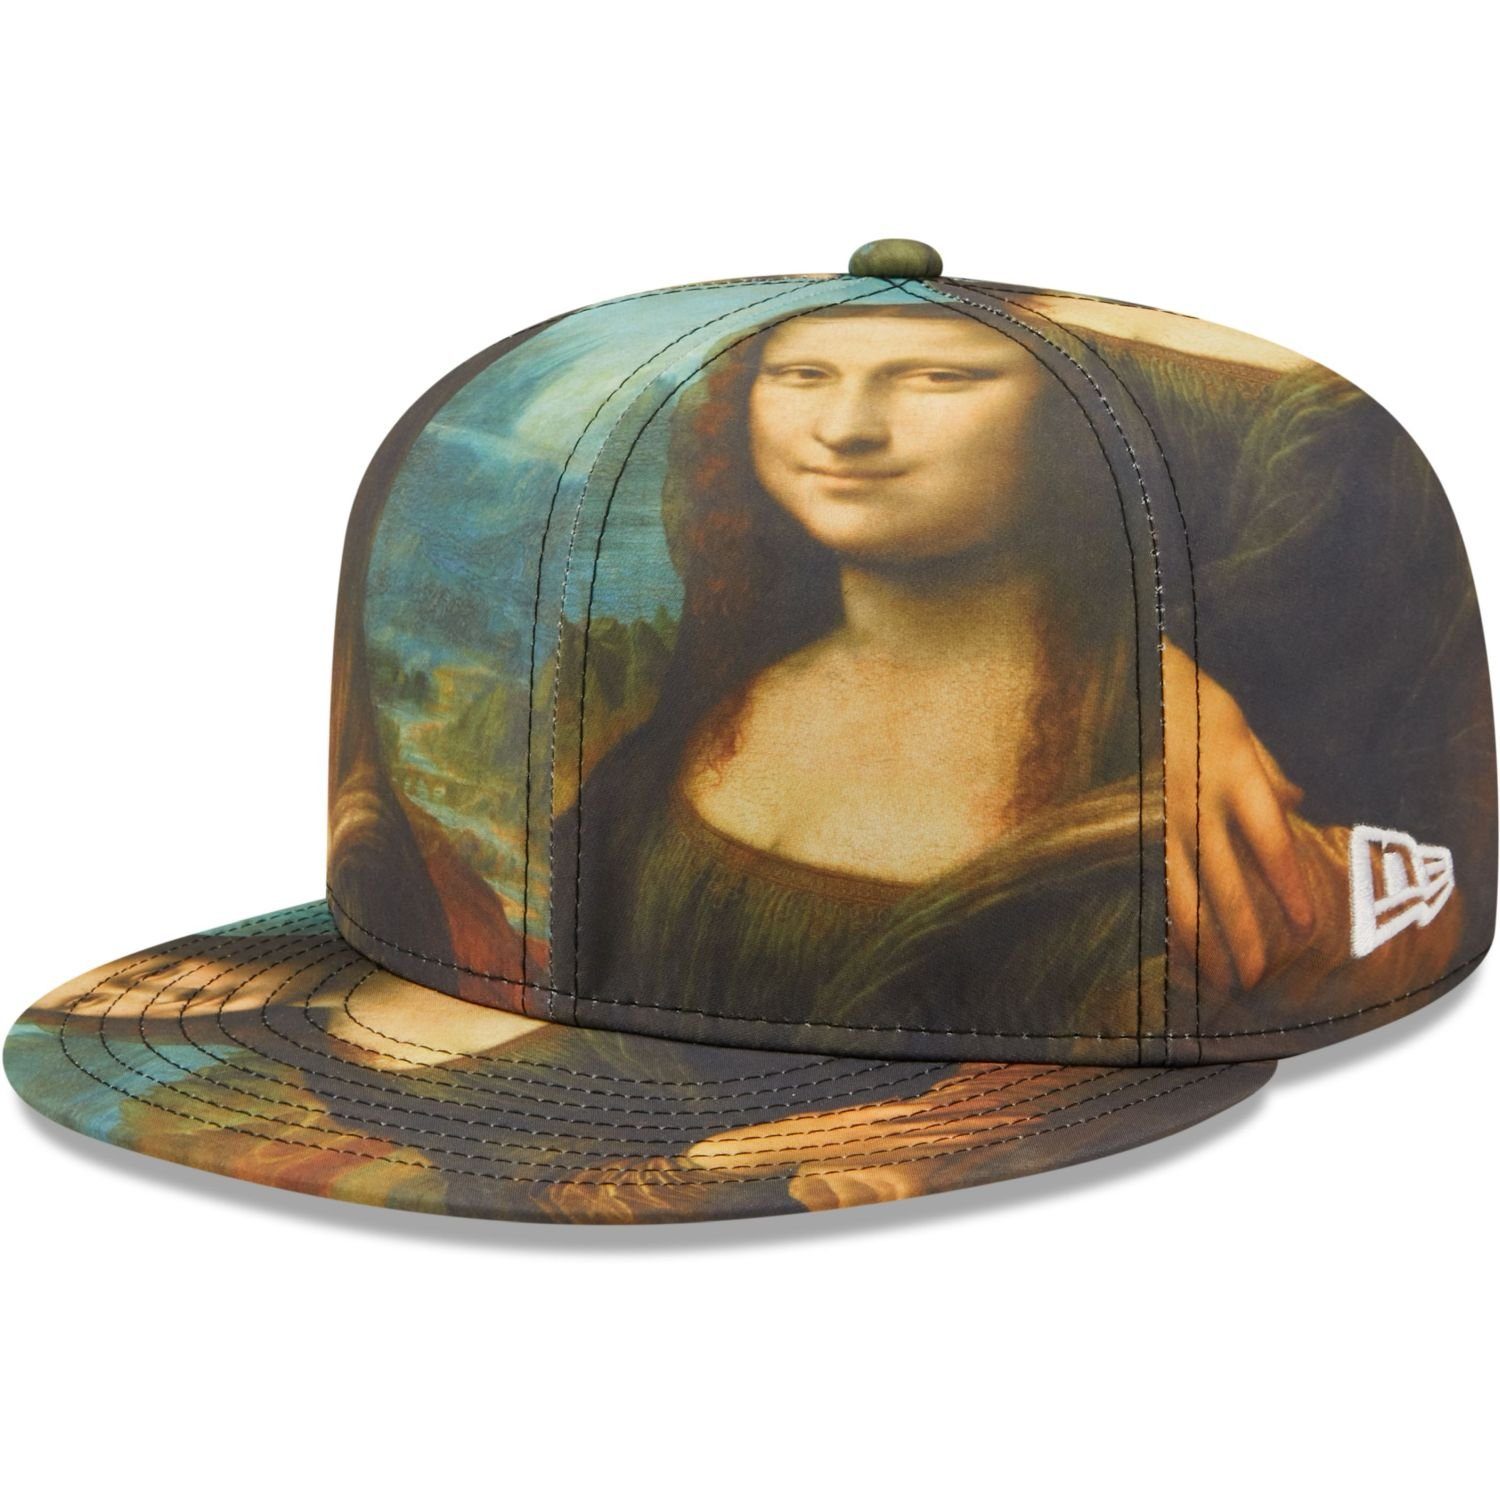 LOUVRE Fitted 59Fifty Mona Lisa Era New Cap LE